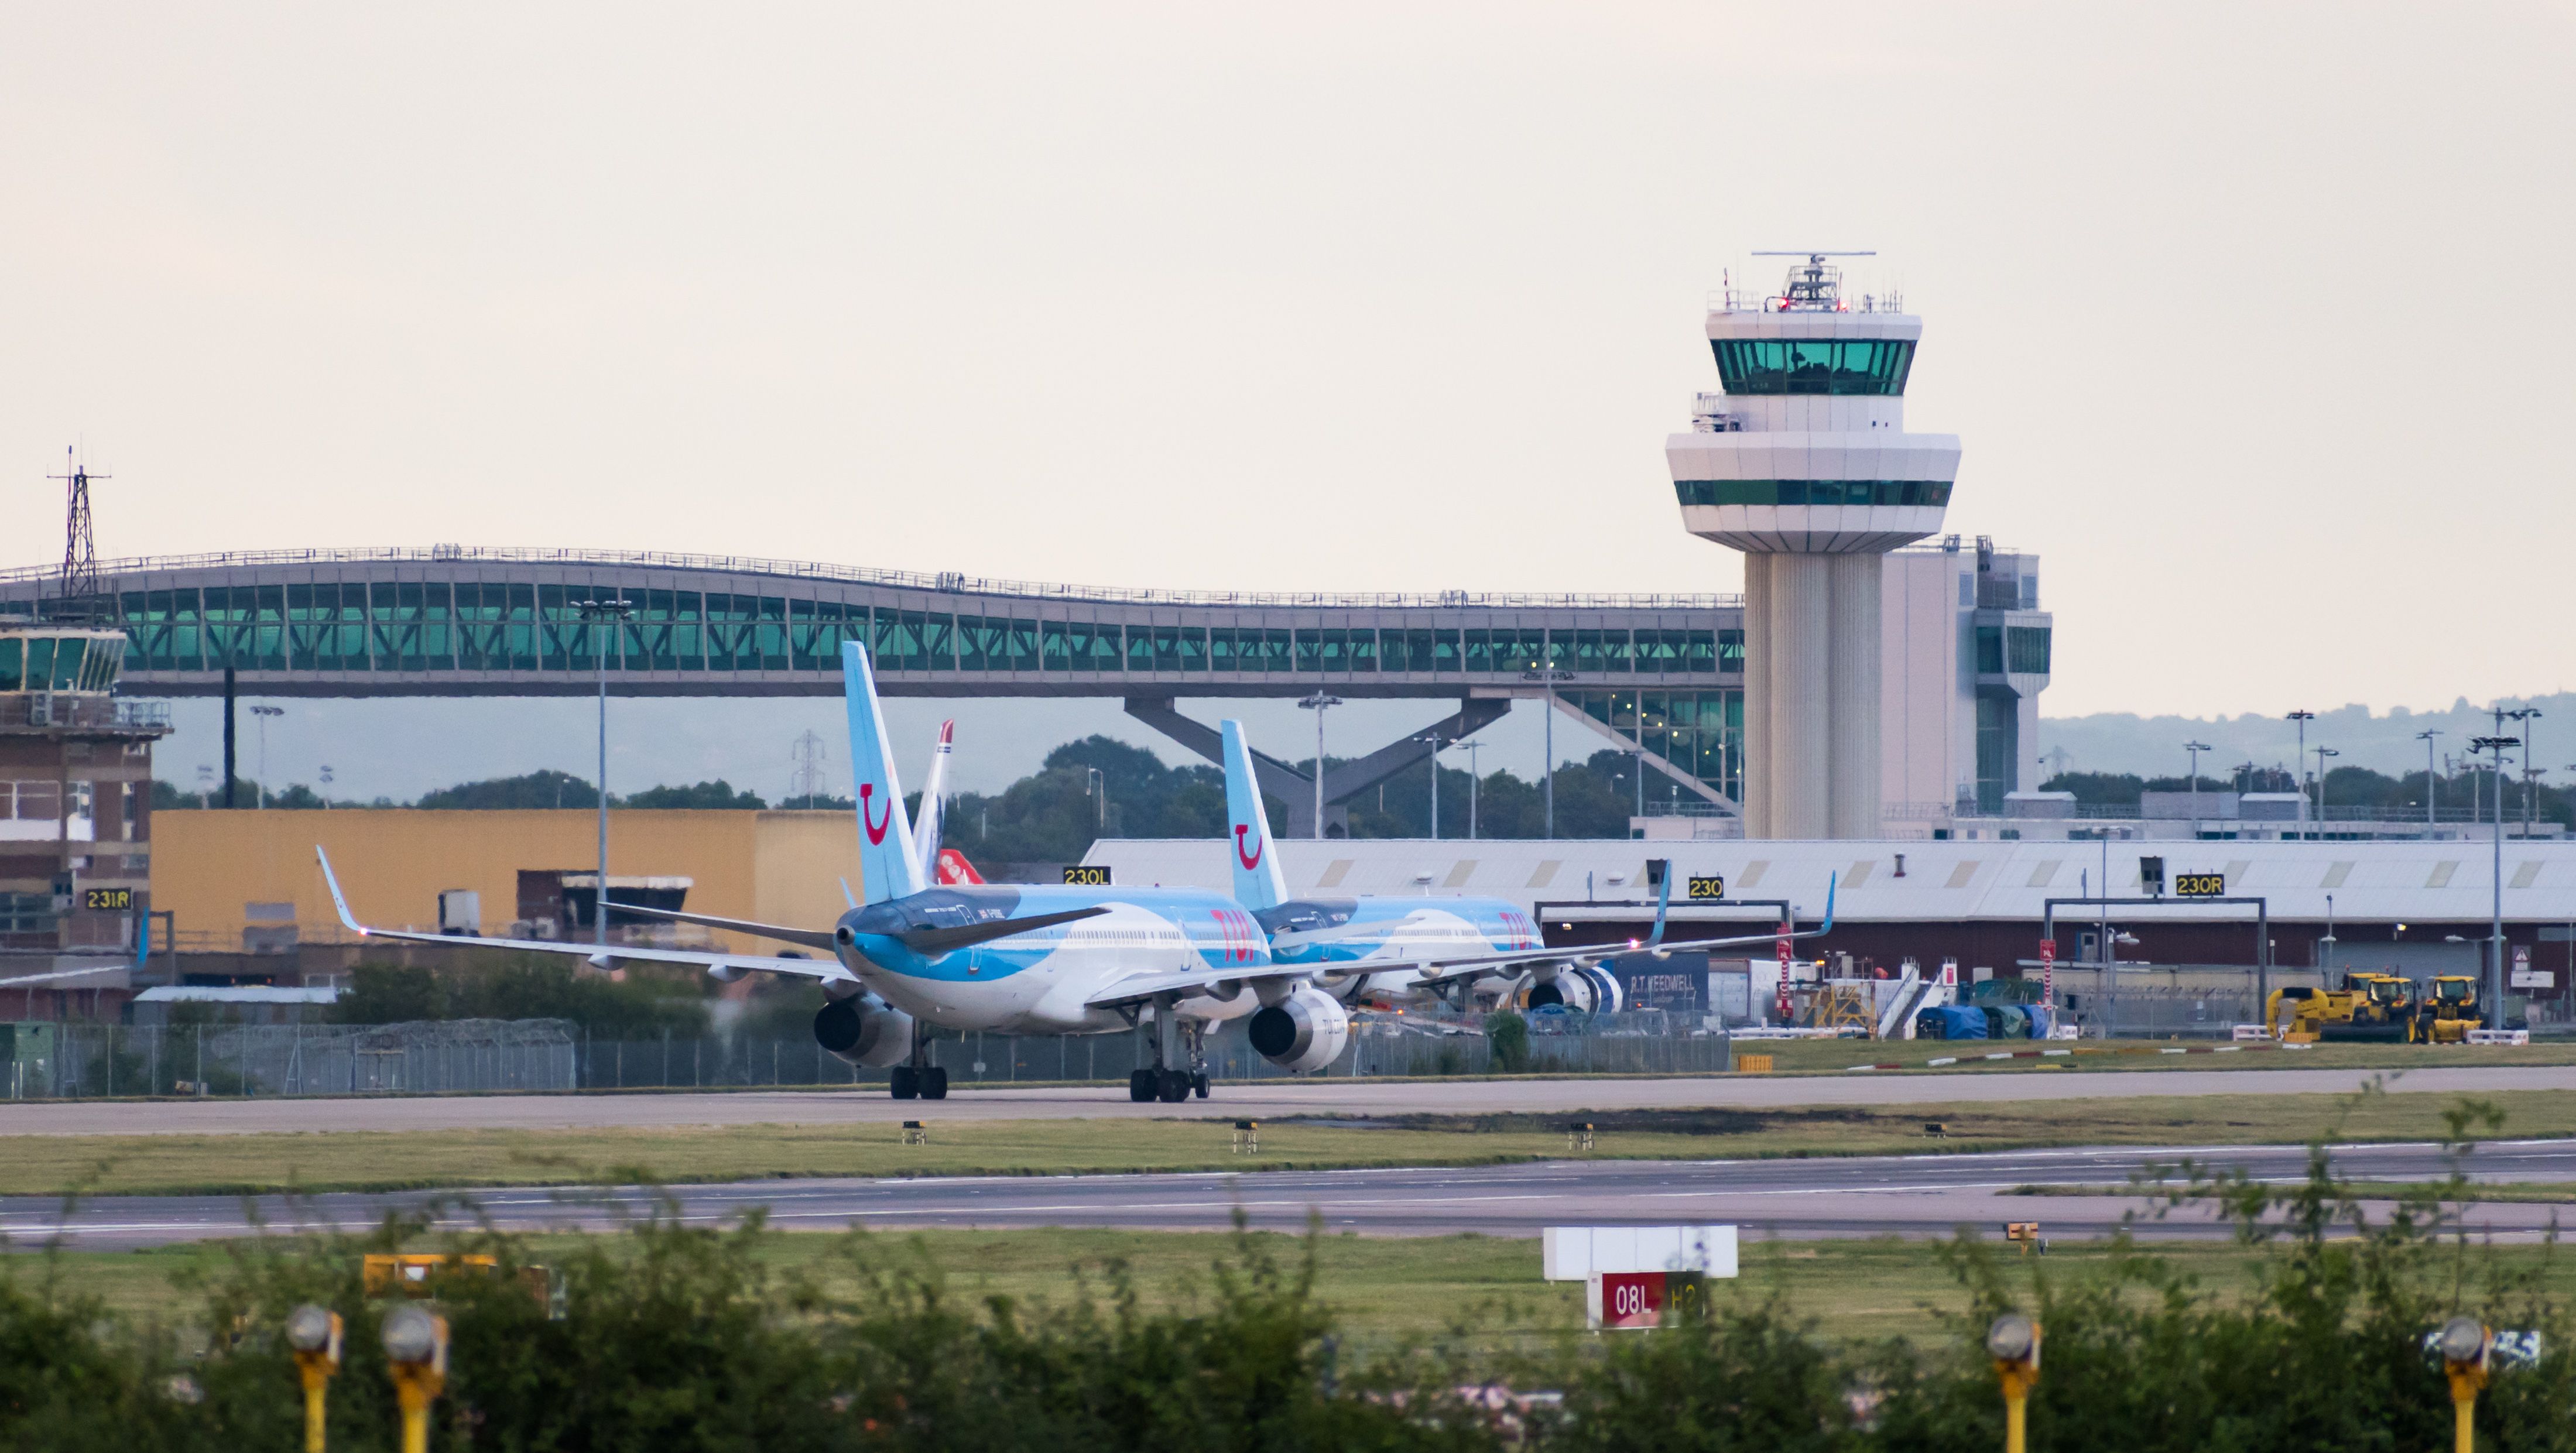 London Gatwick Airport ATC Tower With TUI Planes In Front